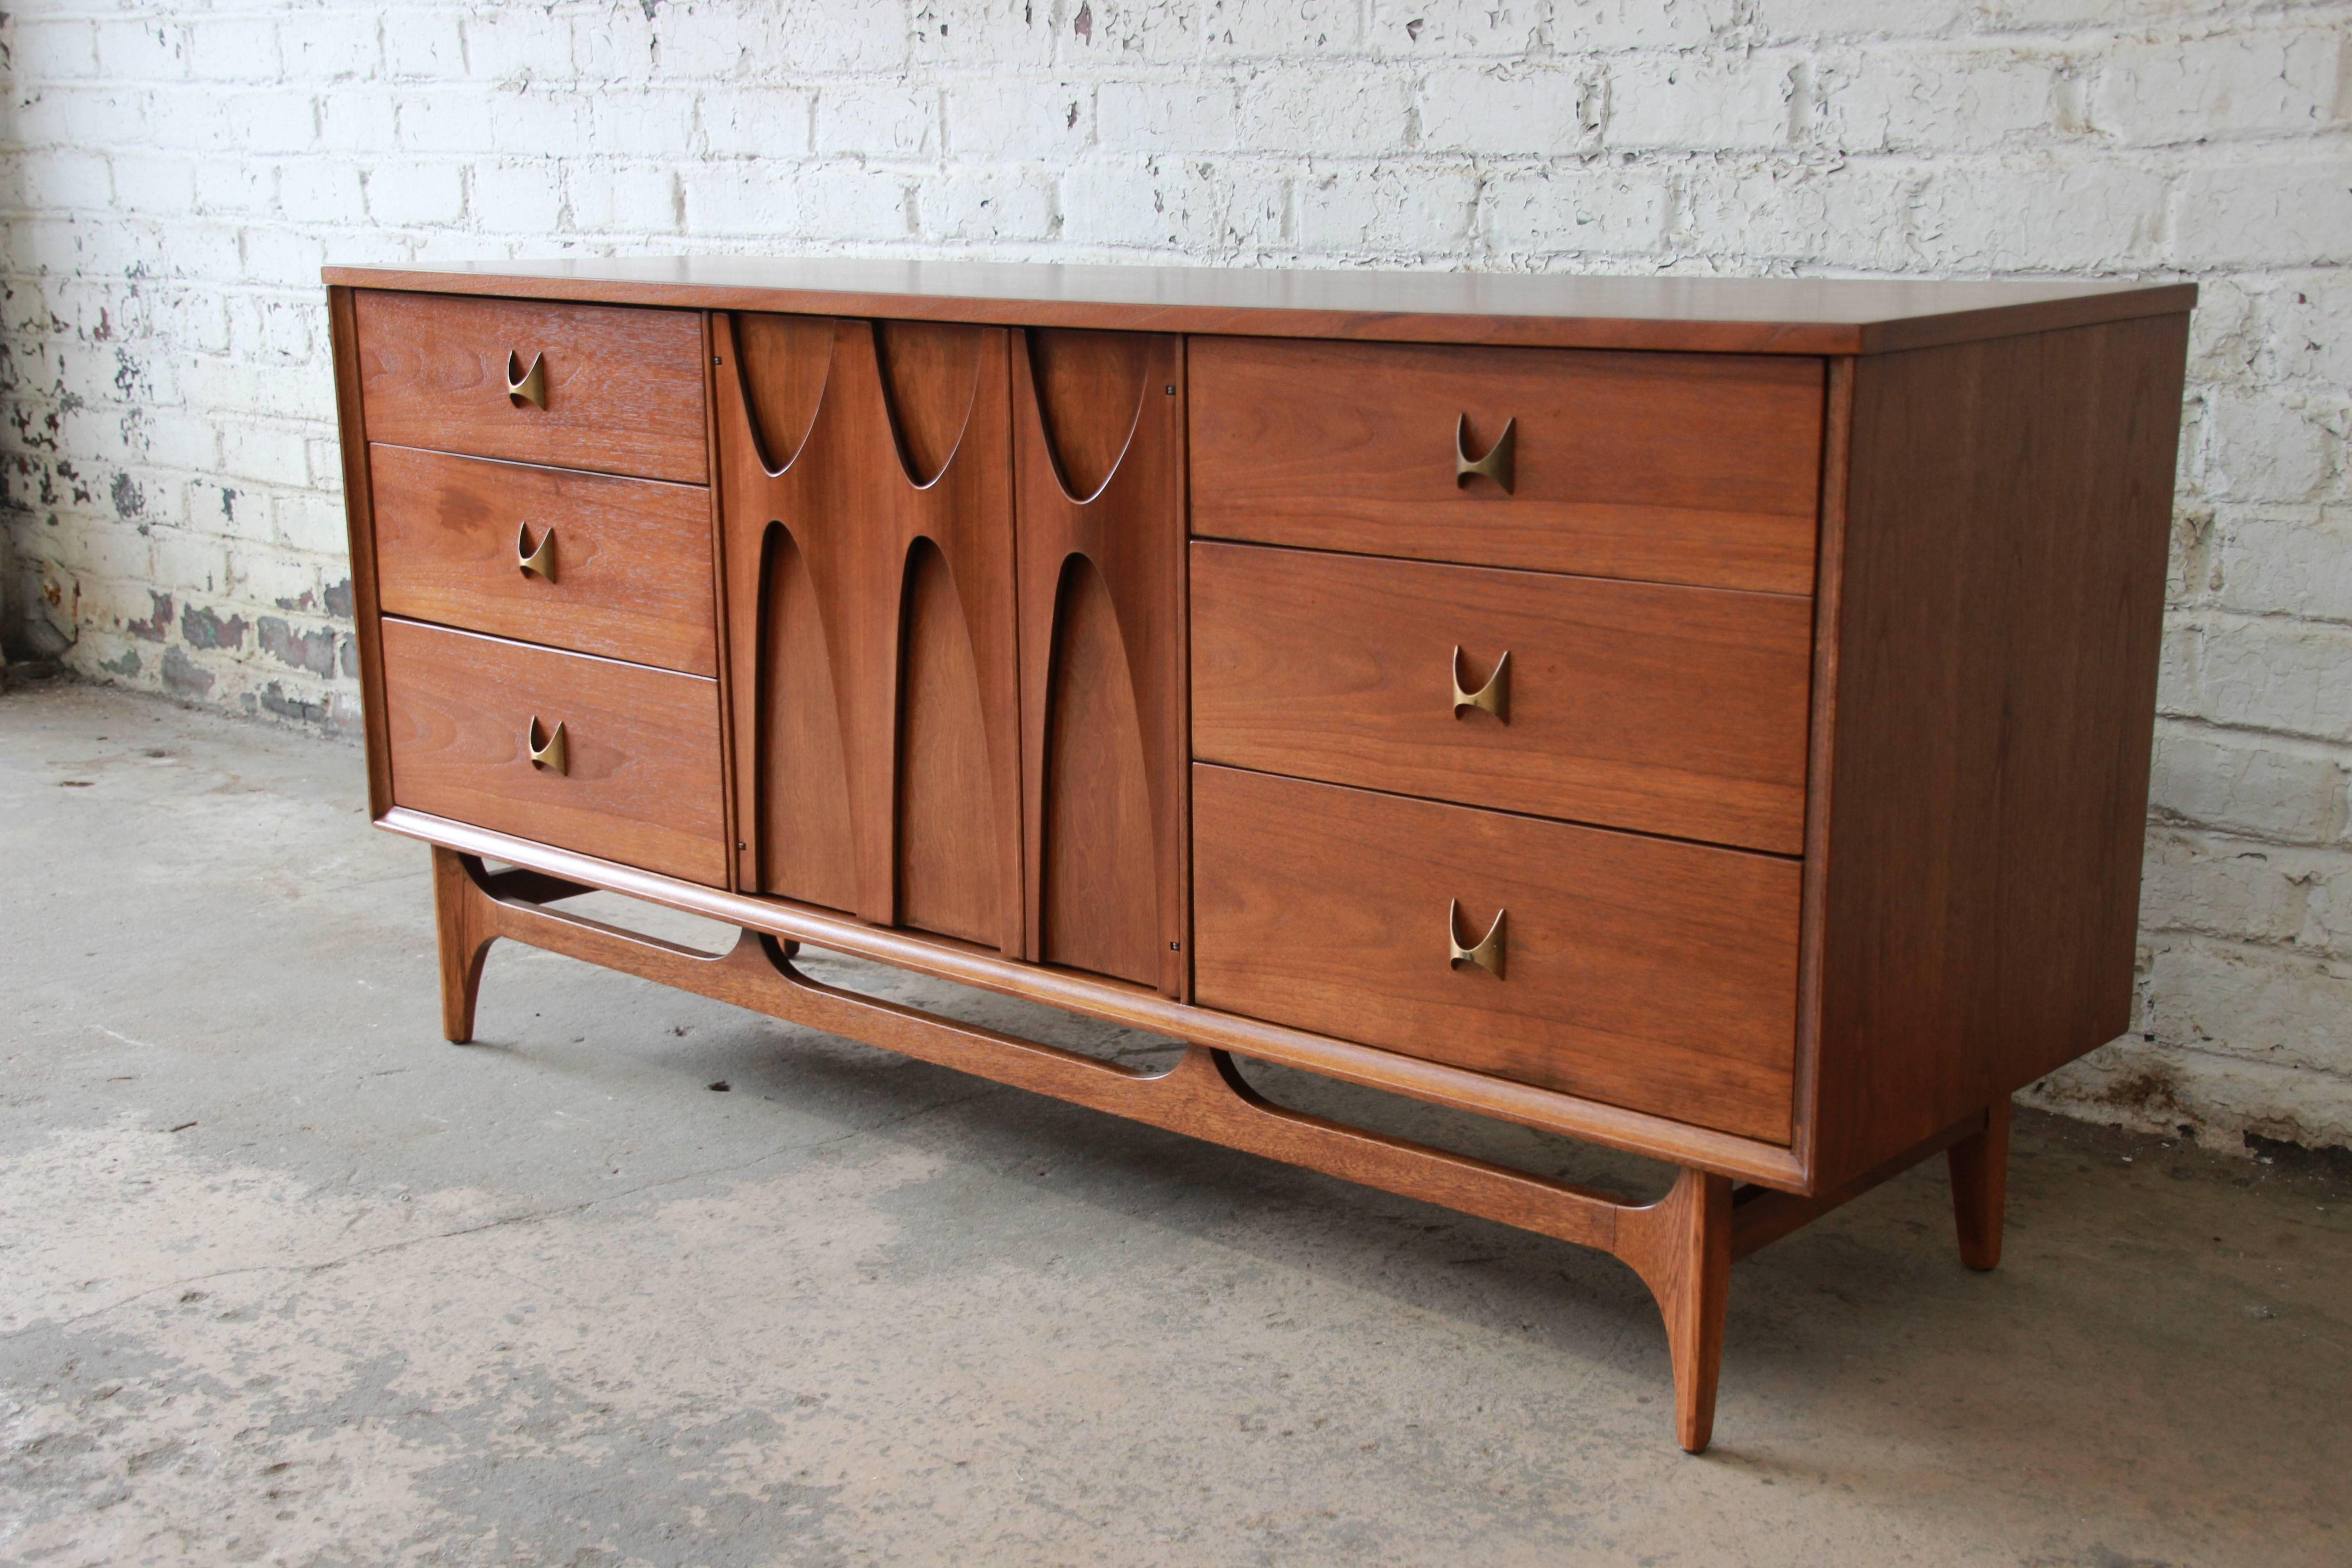 An iconic Broyhill Brasilia Mid-Century Modern sculpted walnut nine-drawer dresser or credenza. The dresser features gorgeous walnut wood grain, with sculpted arches and original pulls. The centre sculpted cabinet doors open up to three drawers,